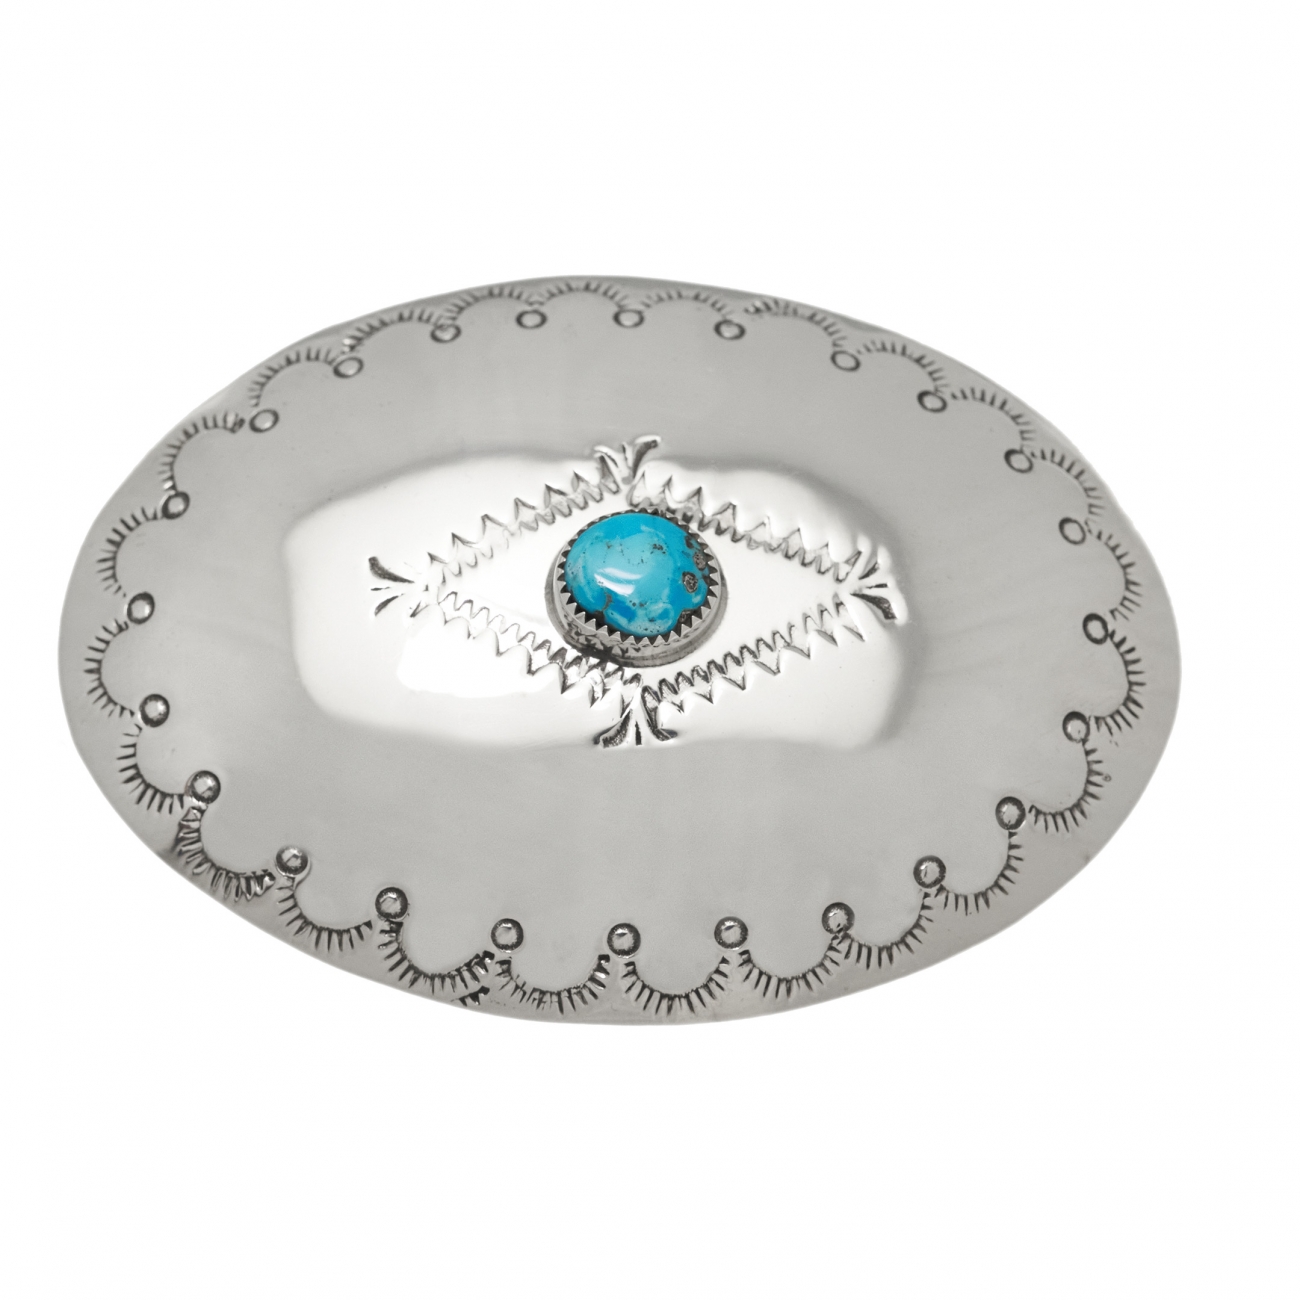 BK85 turquoise and silver buckle - Harpo Paris